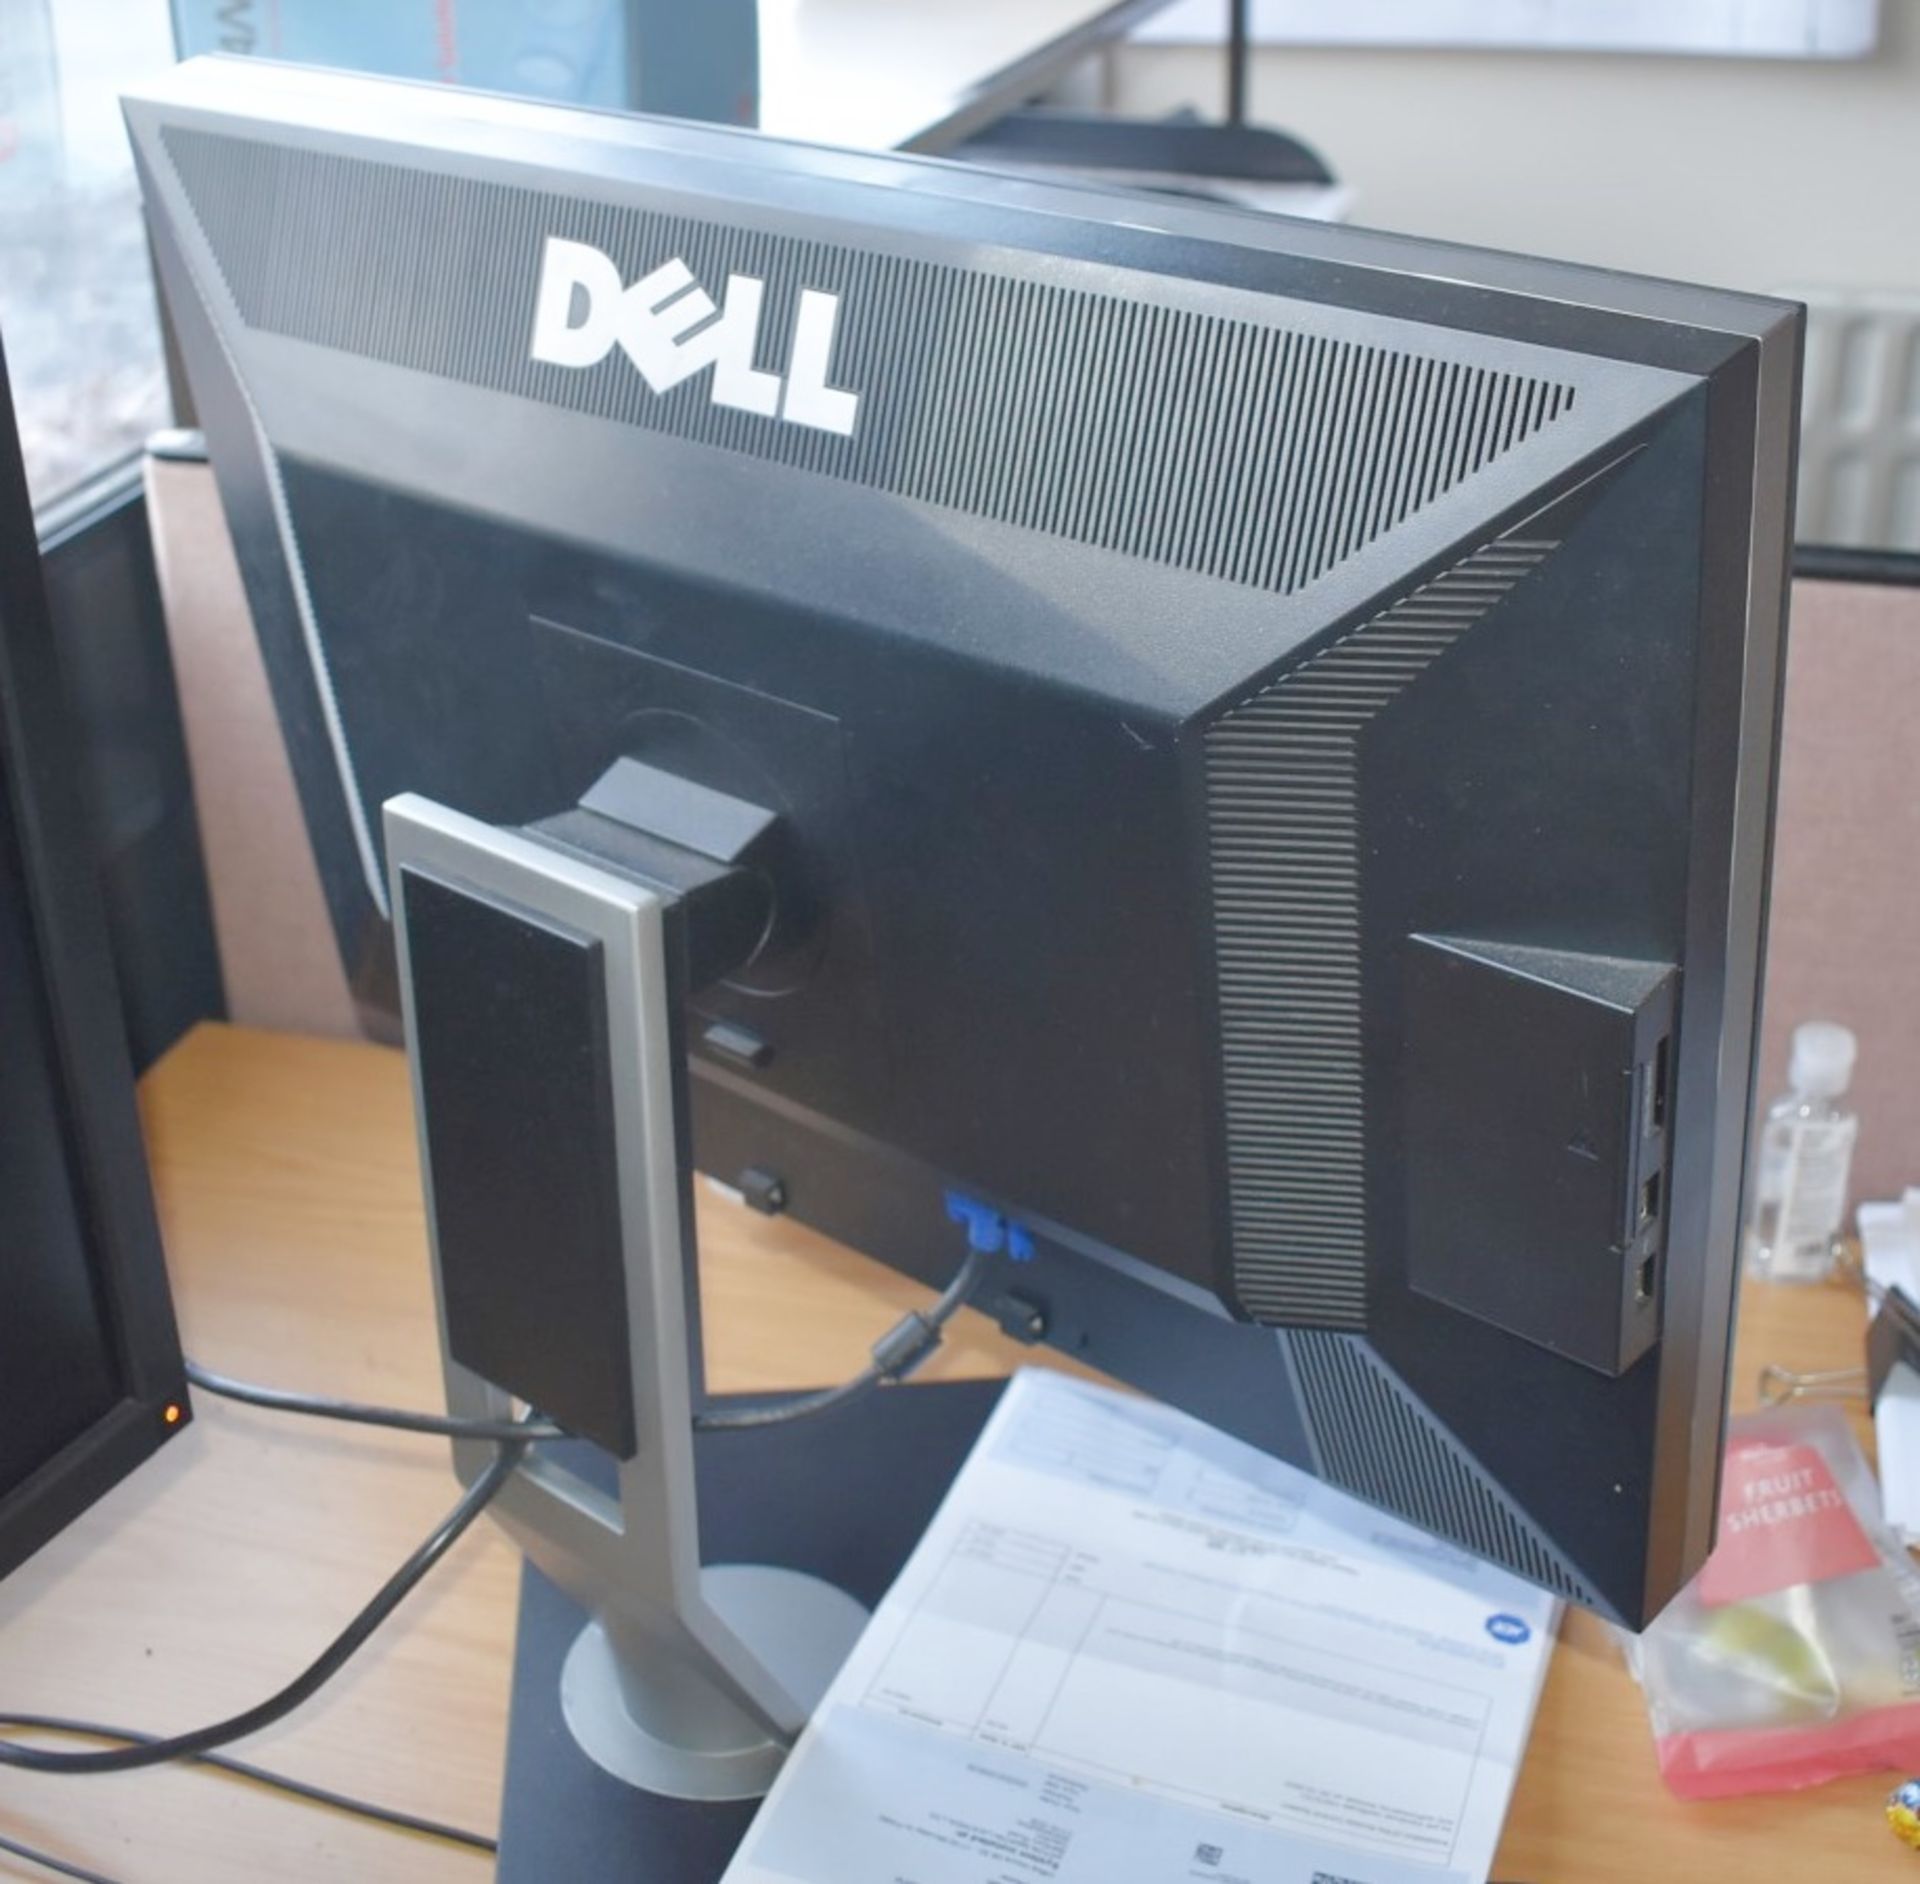 Pair of Dell Flatscreen Monitors - Ref: C226 - CL816 - Location: Birmingham, B45Collection Details - Image 4 of 5